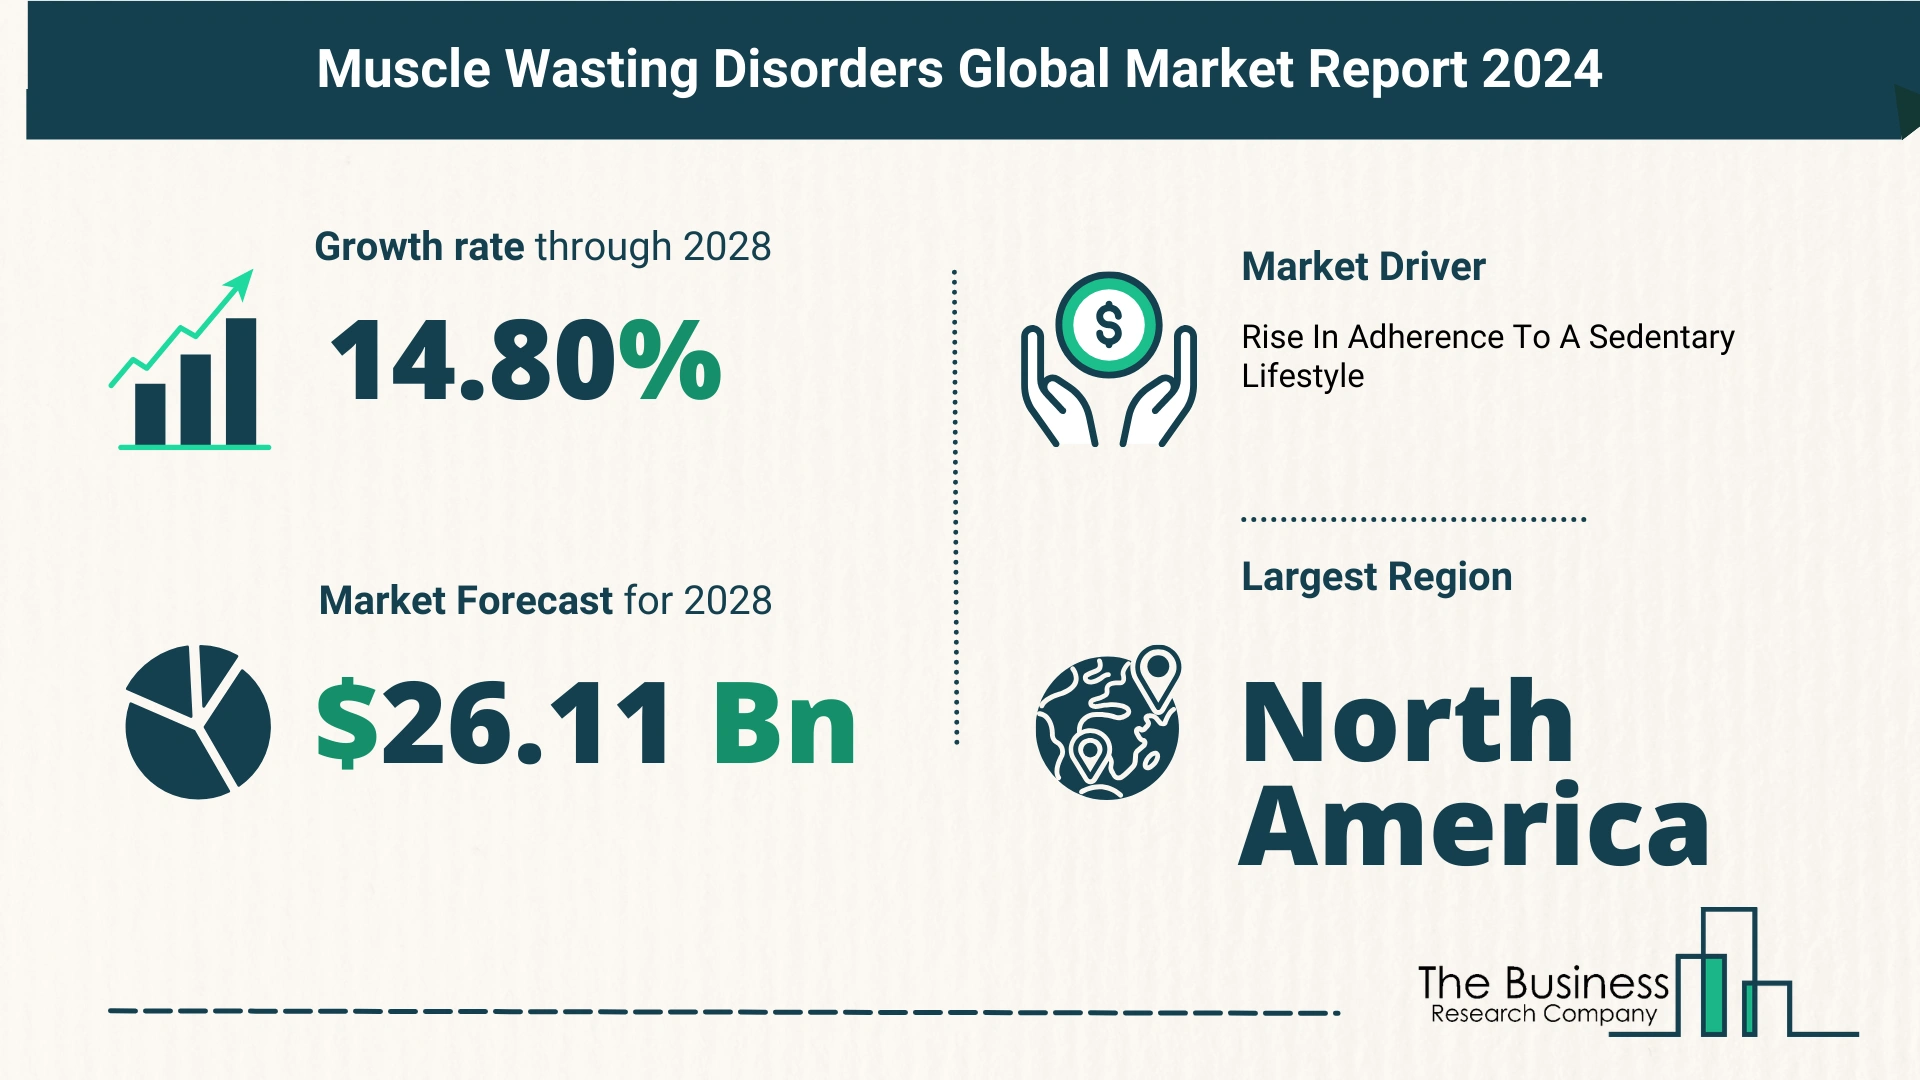 Key Trends And Drivers In The Muscle Wasting Disorders Market 2024